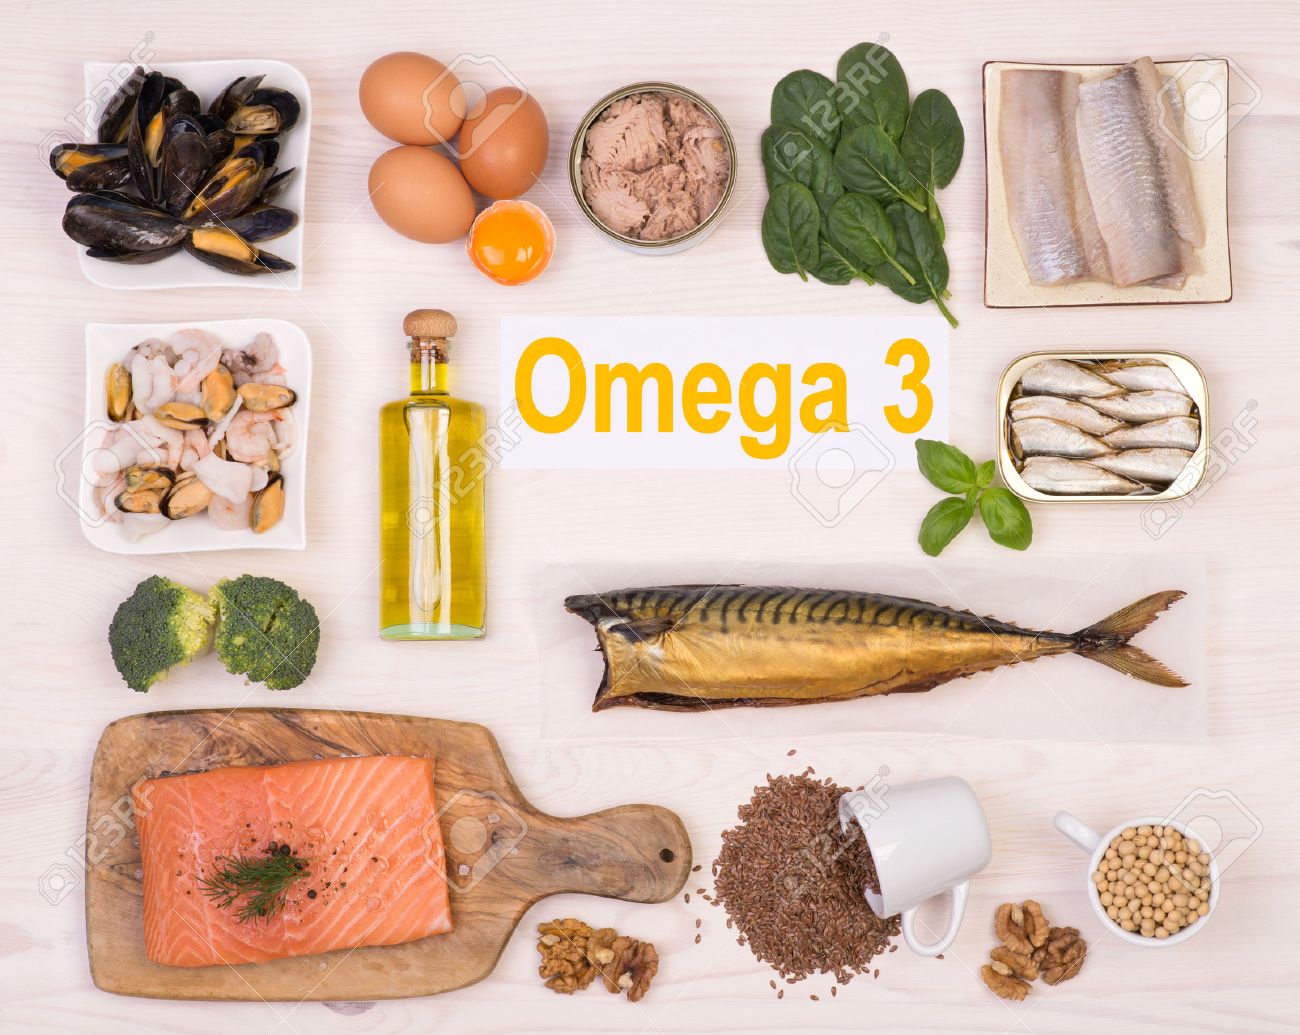 Foods richest in Omega 3